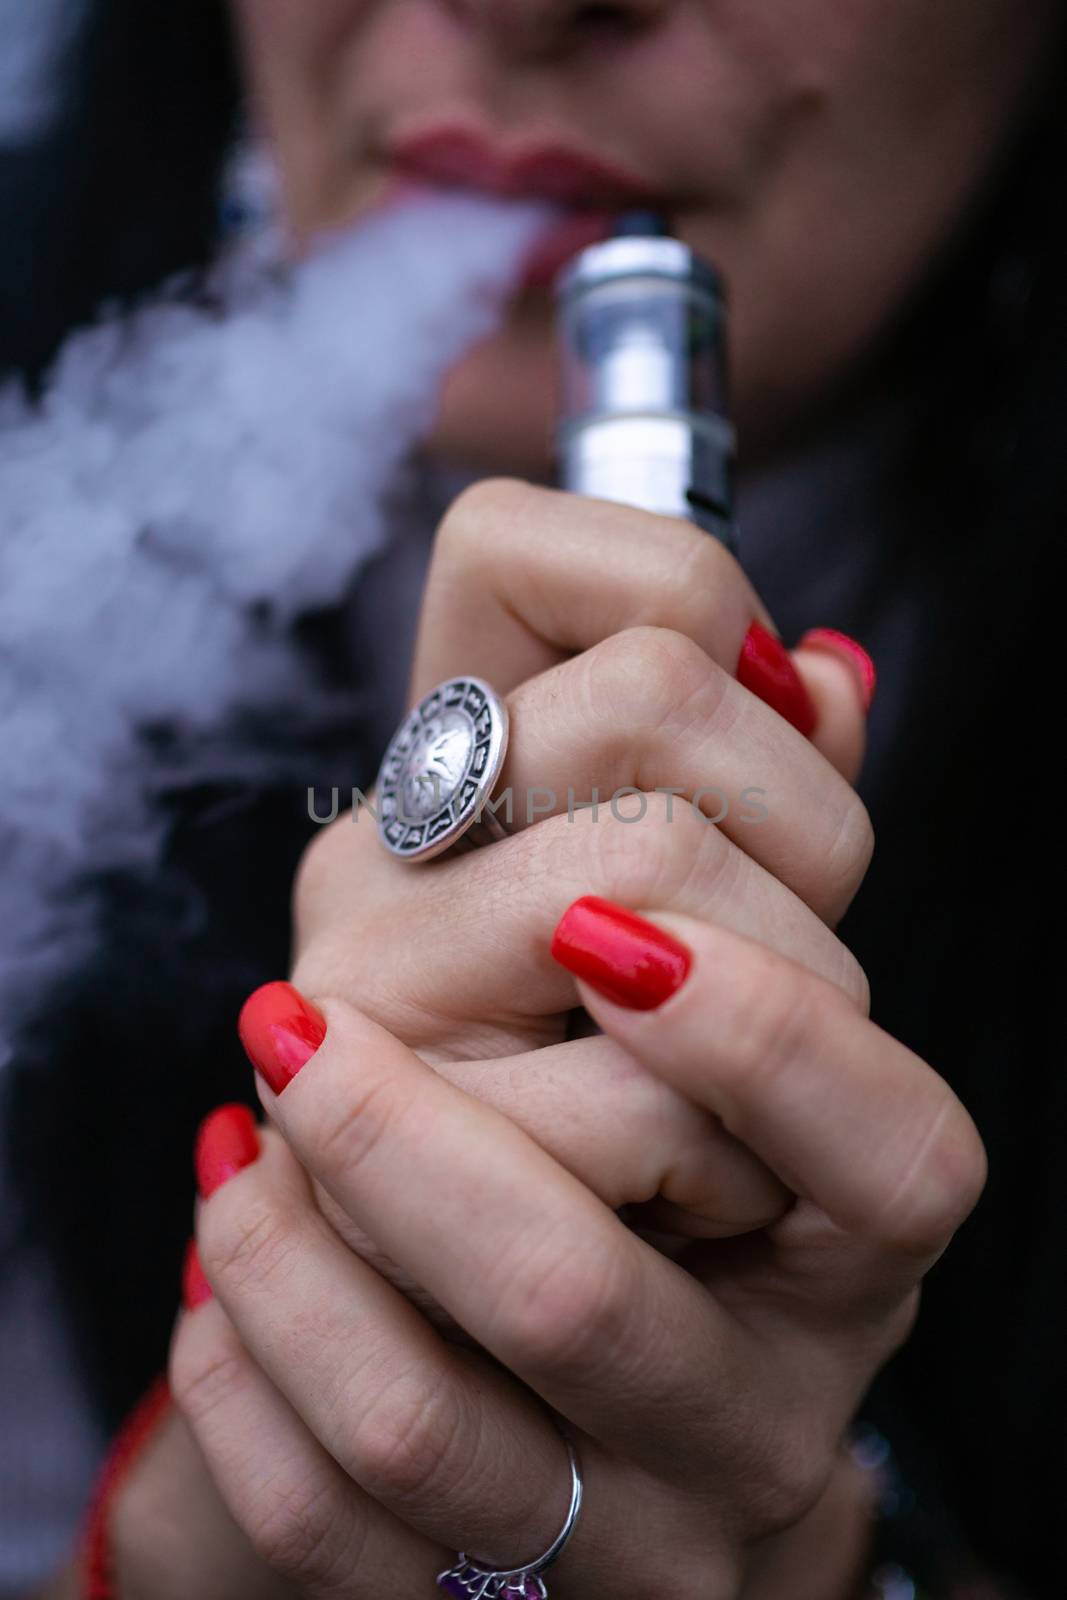 Caucasian woman with red nails manicure and antique ring on finger holds small vape. Smoking alternative vay. Woman exhales thick smoke. Life without cigarettes. Woman-vaper. Small e-cigarette. by alexsdriver